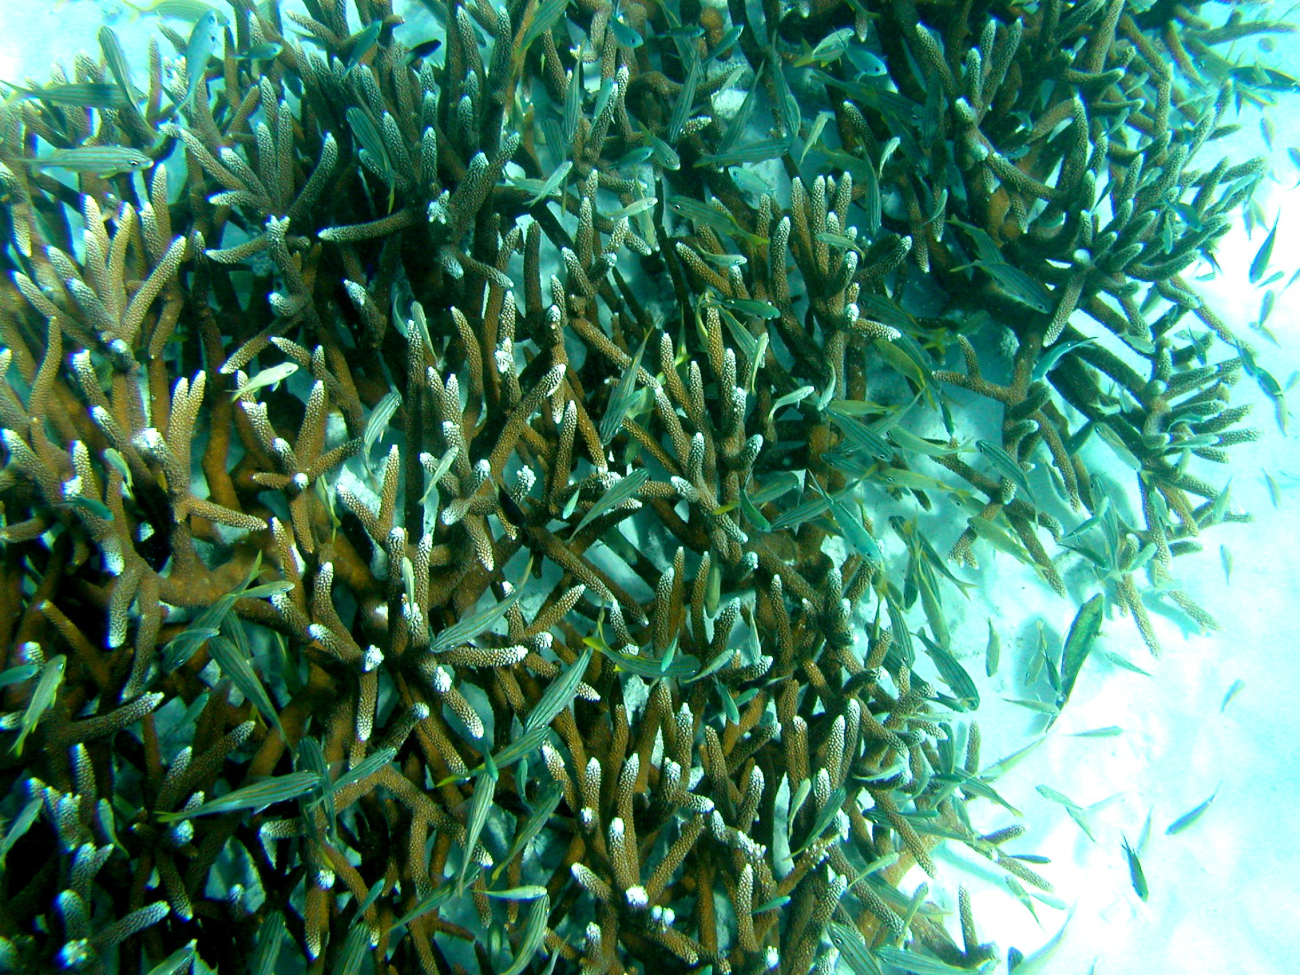 Staghorn coral grows quickly